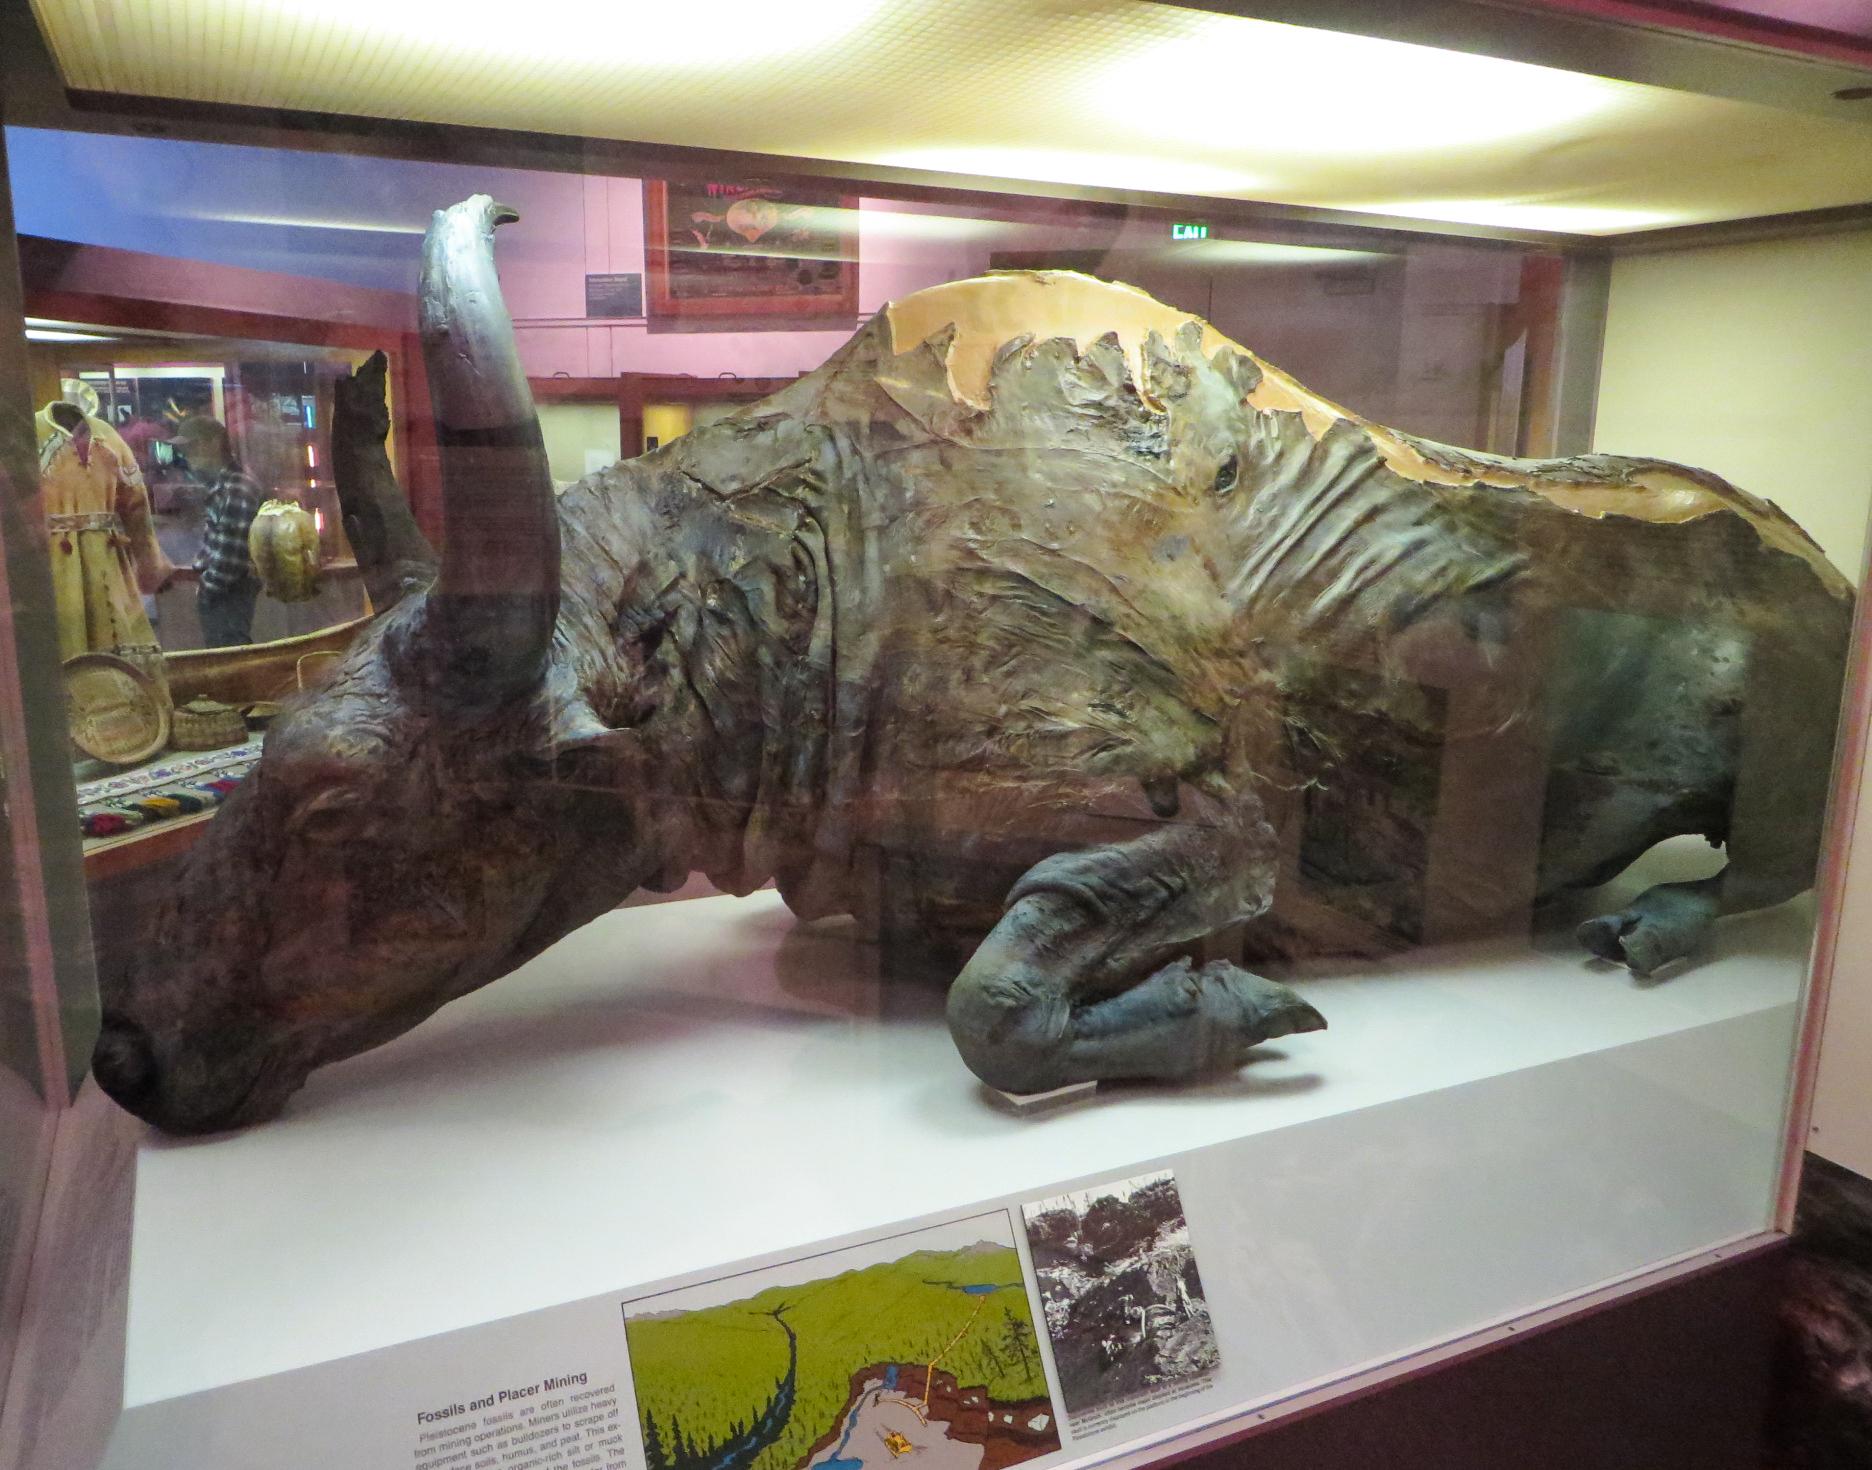 A steppe bison on display at the University of Alaska Museum of the North in Fairbanks.The steppe bison is one of several extinct large mammals that roamed interior Alaska during the Wisconsinan glacial period, 100,000 to 10,000 years ago. This specimen died about 36,000 years ago and was found during the summer of 1979. It has a bluish color over the entire carcass, caused by the phosphorus in the animal tissue reacting with the iron in the soil to produce a mineral coating of vivianite - which became a brilliant blue when it was exposed to air. Hence the name Blue Babe.